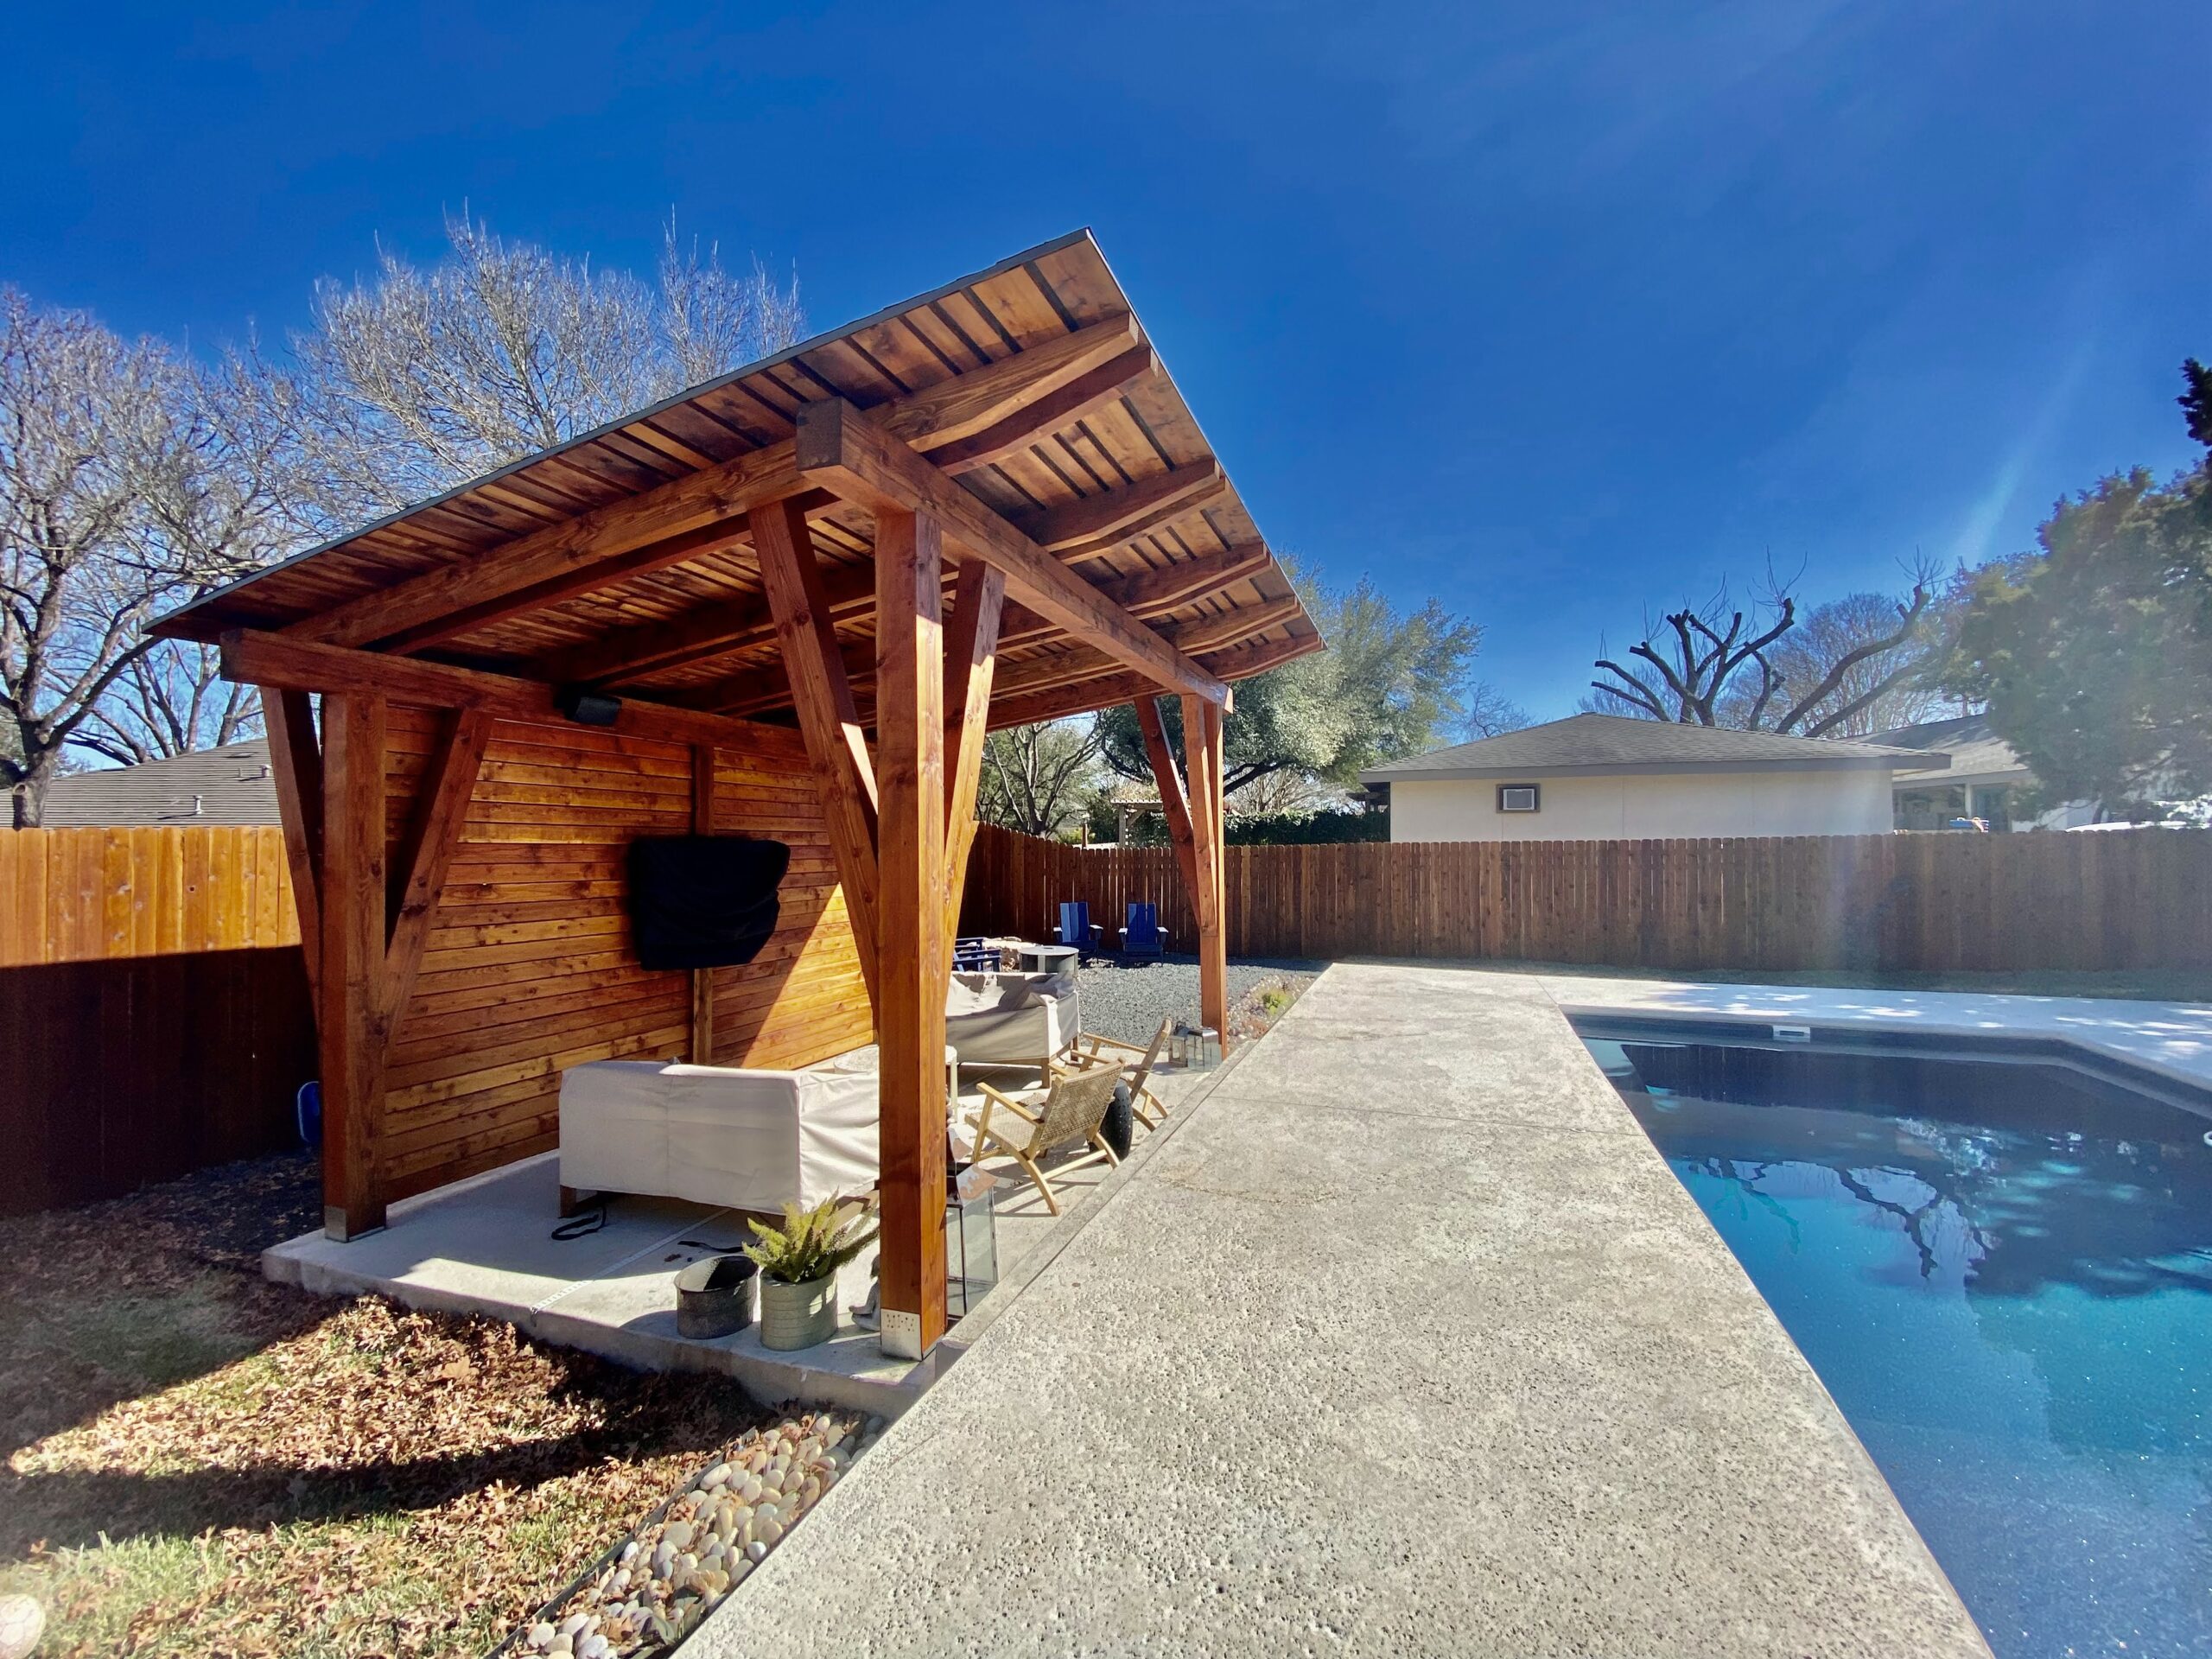 Dripping Springs, 12 x 16, heavy timbers, shingle roof, cedar, contemporary, pavilion kit, free standing pavilion, cement or concrete pad, backwall, free standing pavilion, cabana, post and beam, builder/contractor, residential